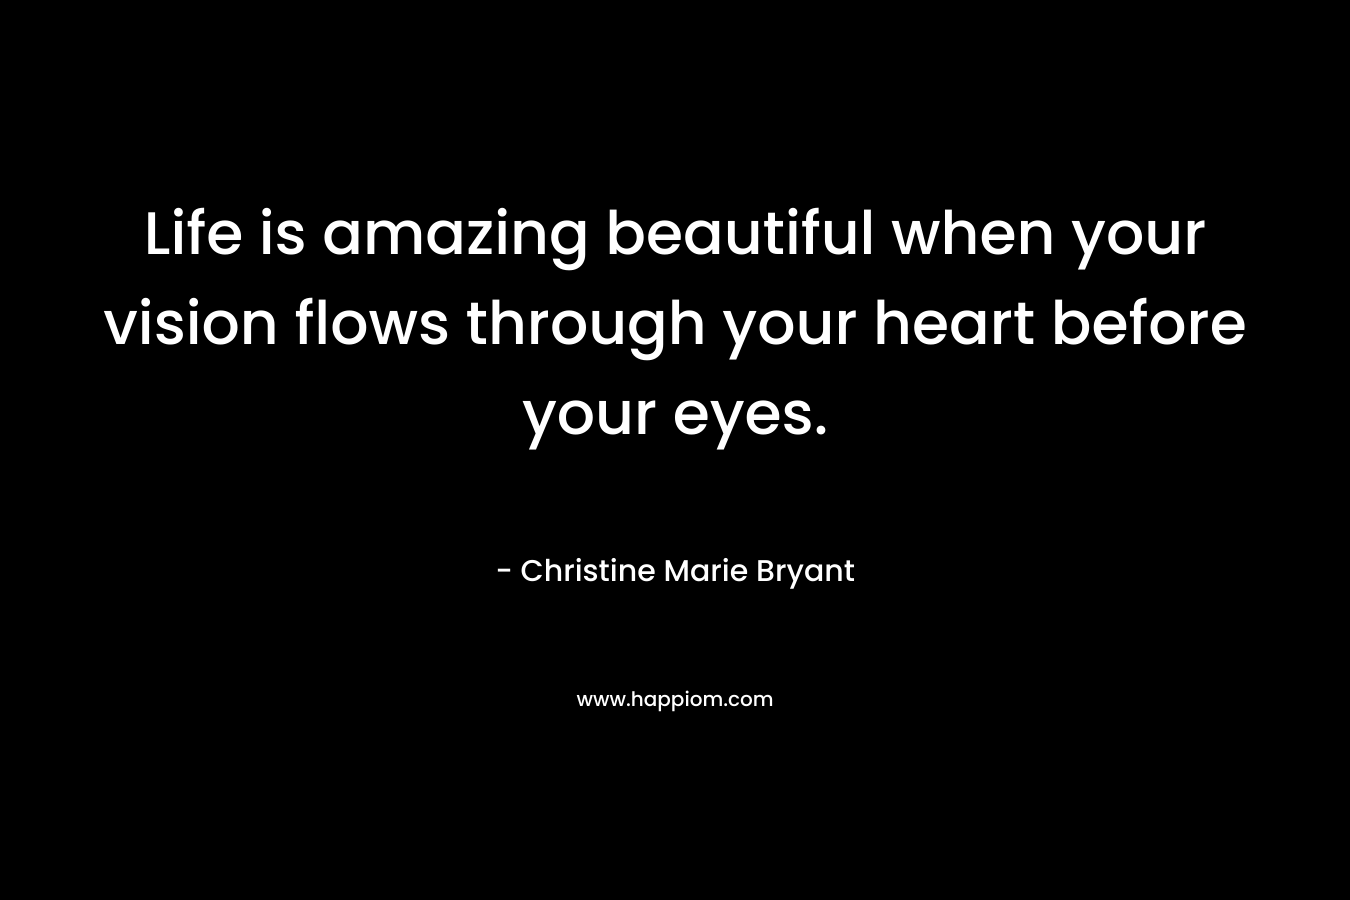 Life is amazing beautiful when your vision flows through your heart before your eyes.